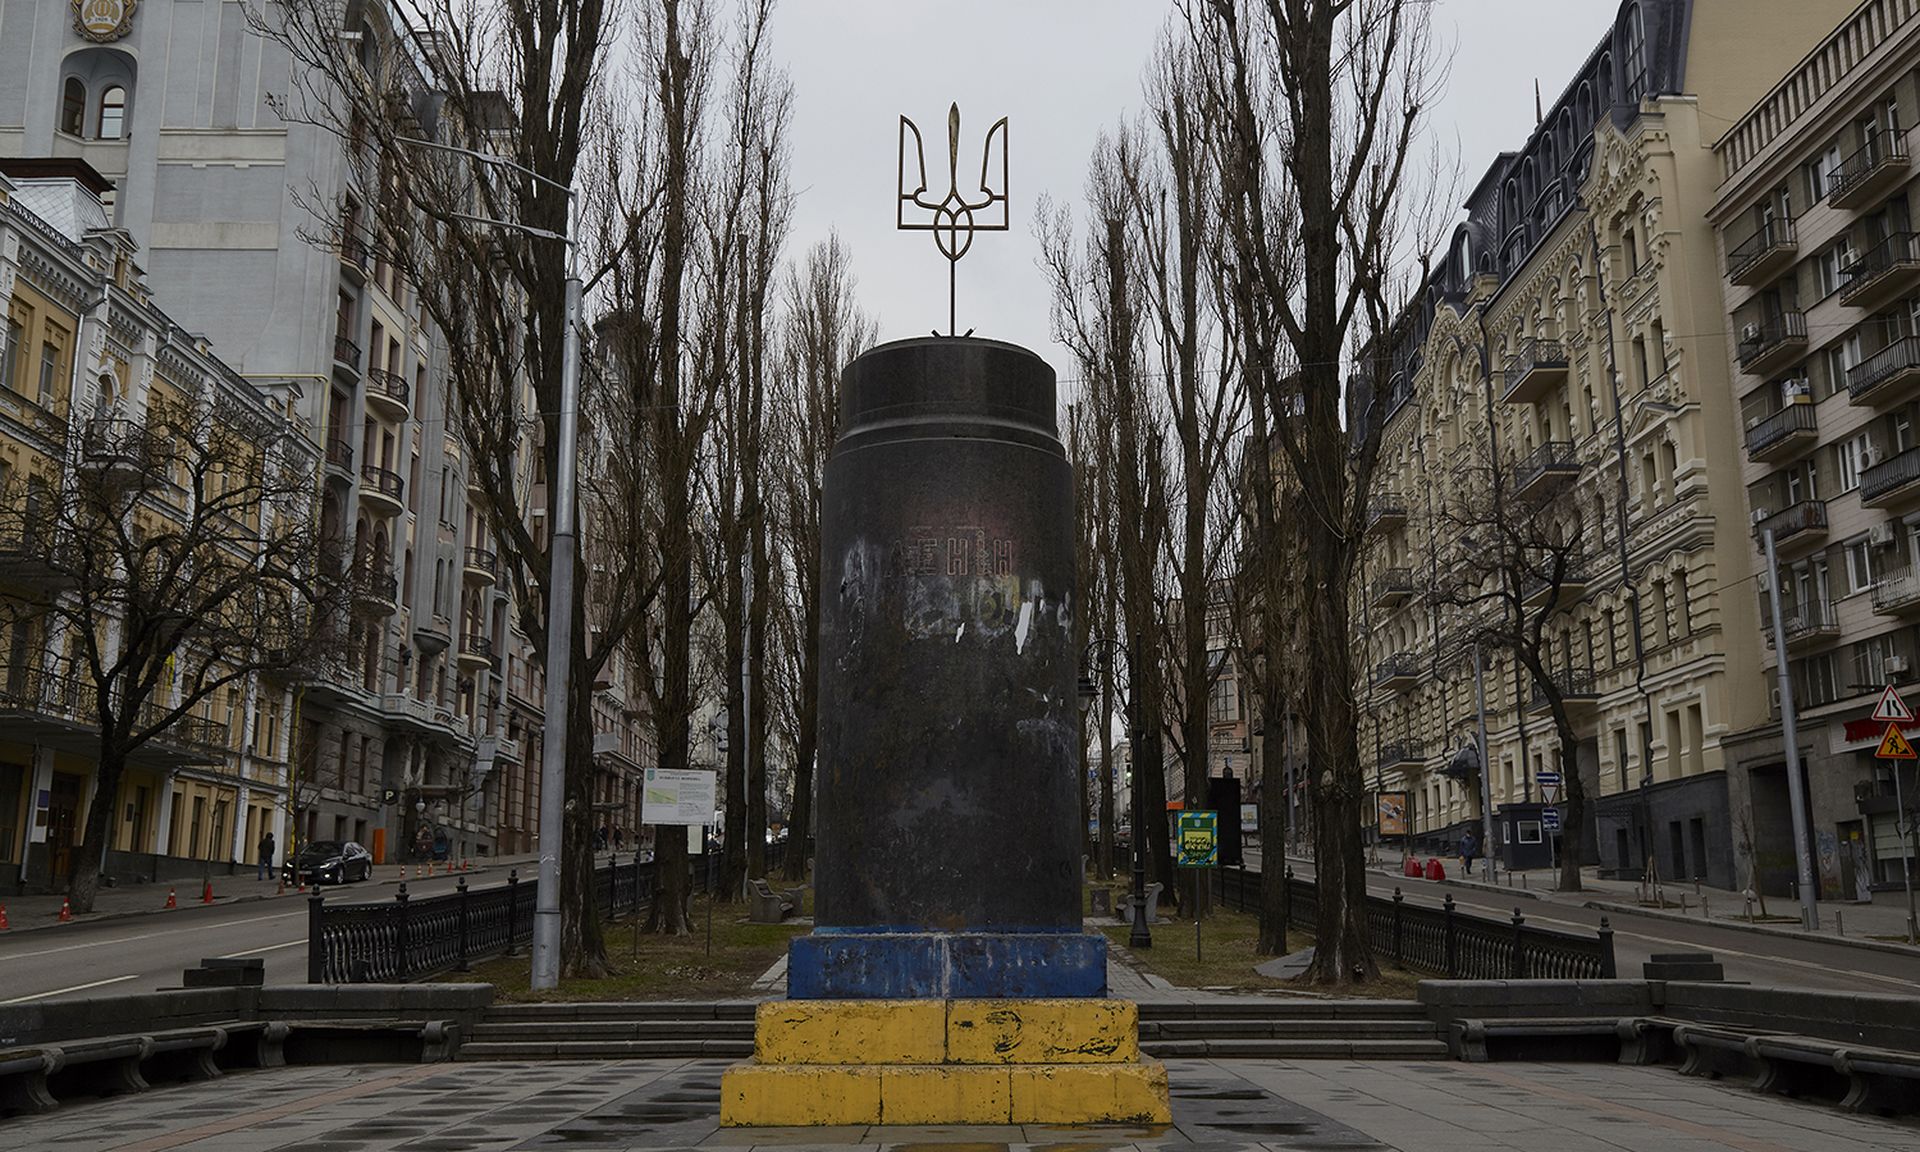 Symantec researchers say ransomware may have been used as a decoy to deploy new wiper malware ahead of Russia&#8217;s invasion of Ukraine. Pictured: The Ukrainian trident is seen where a Lenin statue once stood in Kyiv, Ukraine, on Feb. 24, 2022. (Photo by Pierre Crom/Getty Images)